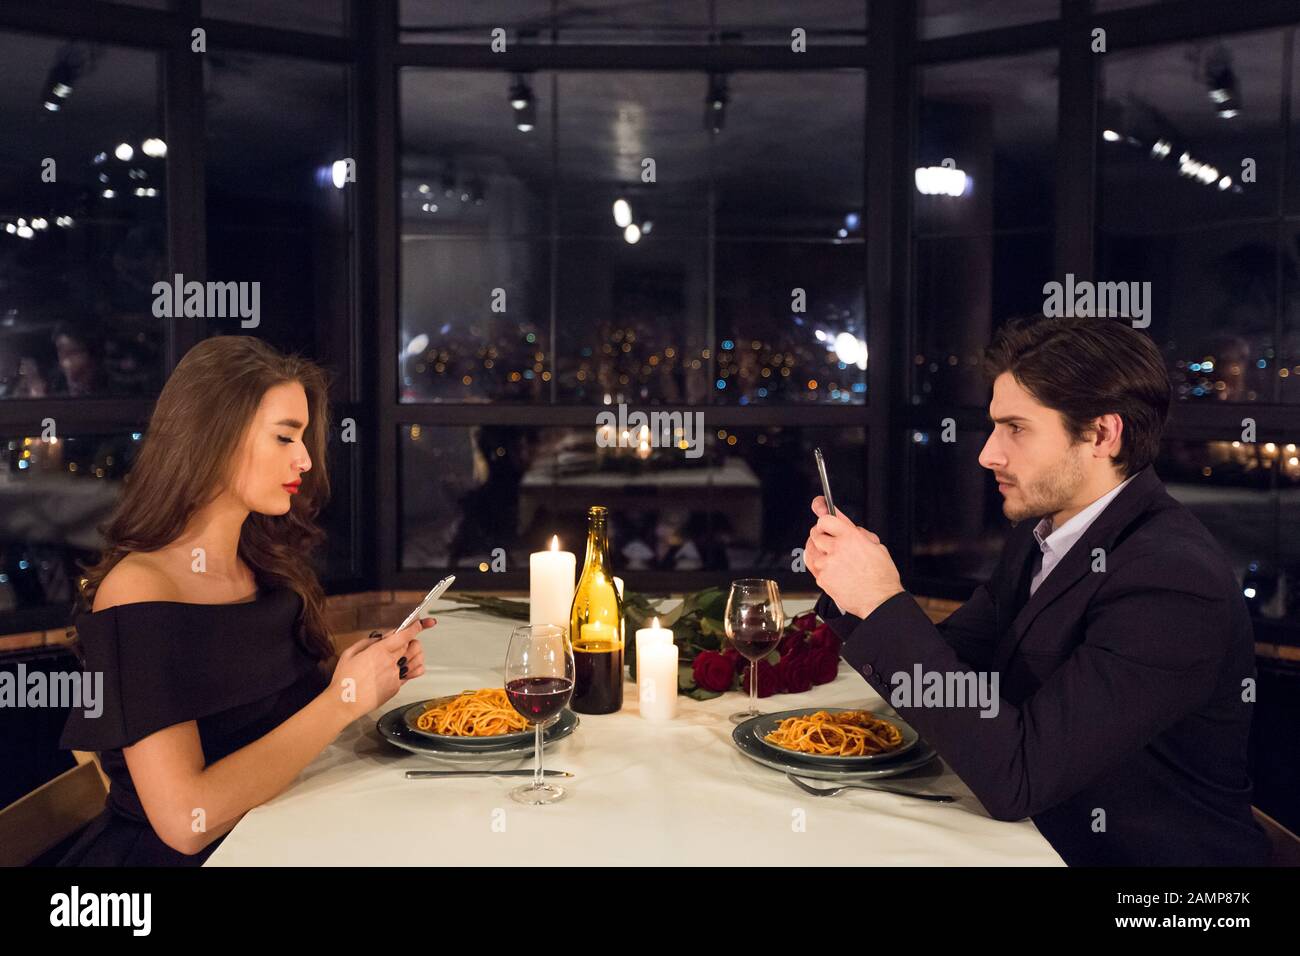 Man and woman chatting on cellphones, ignoring each other Stock Photo